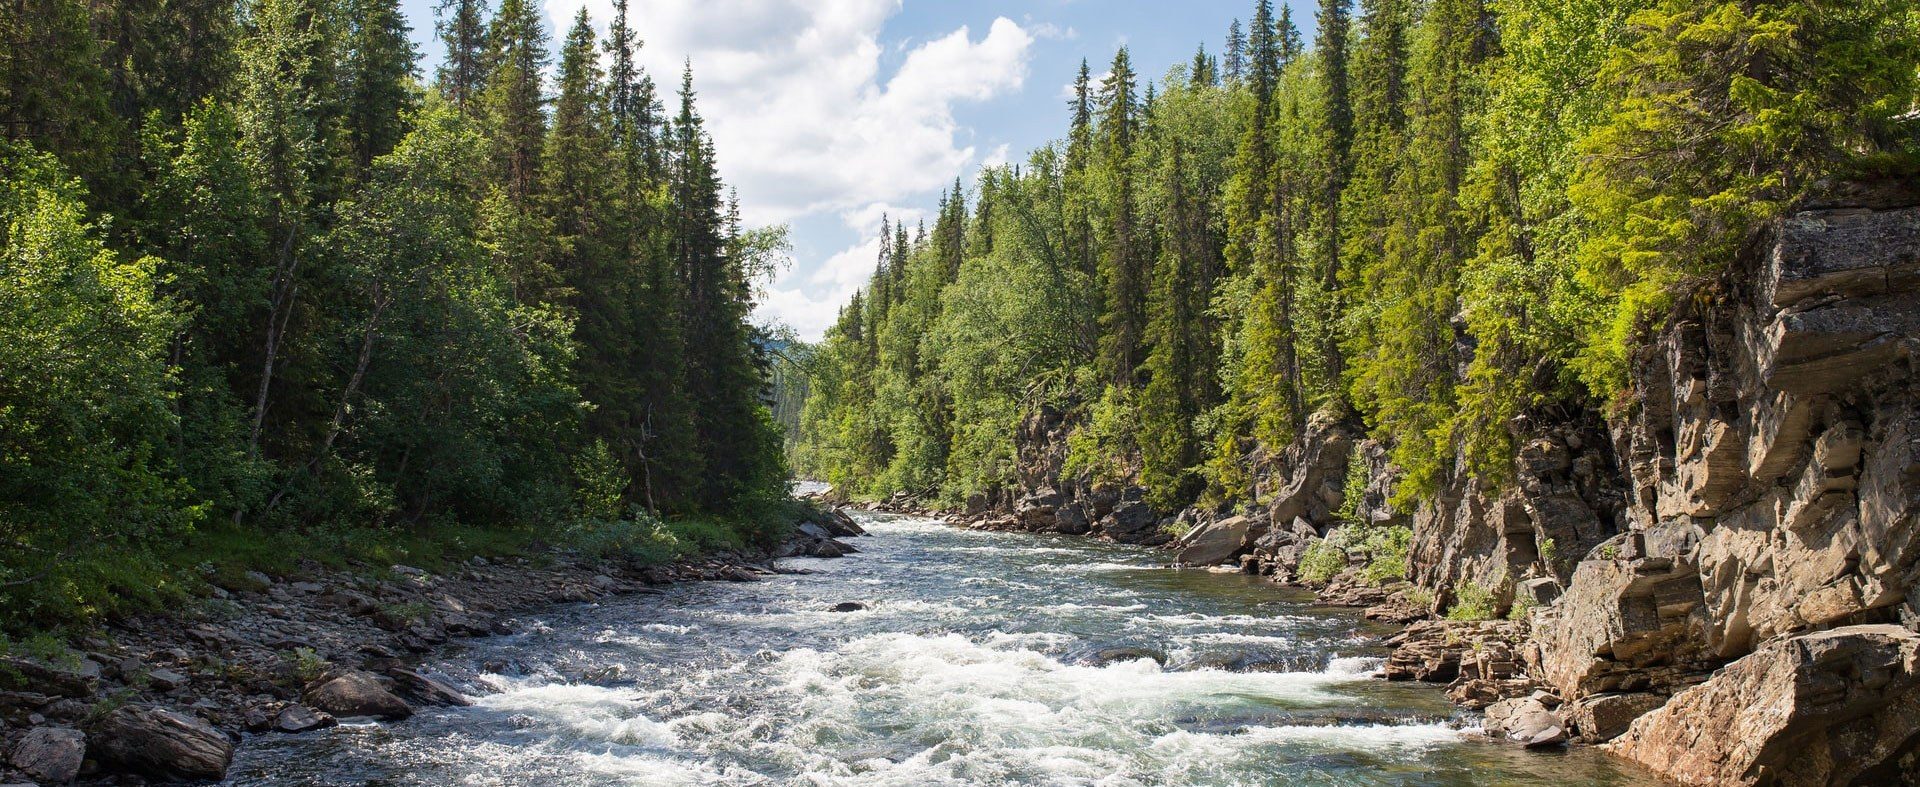 Photo of a river surrounded by evergreen trees